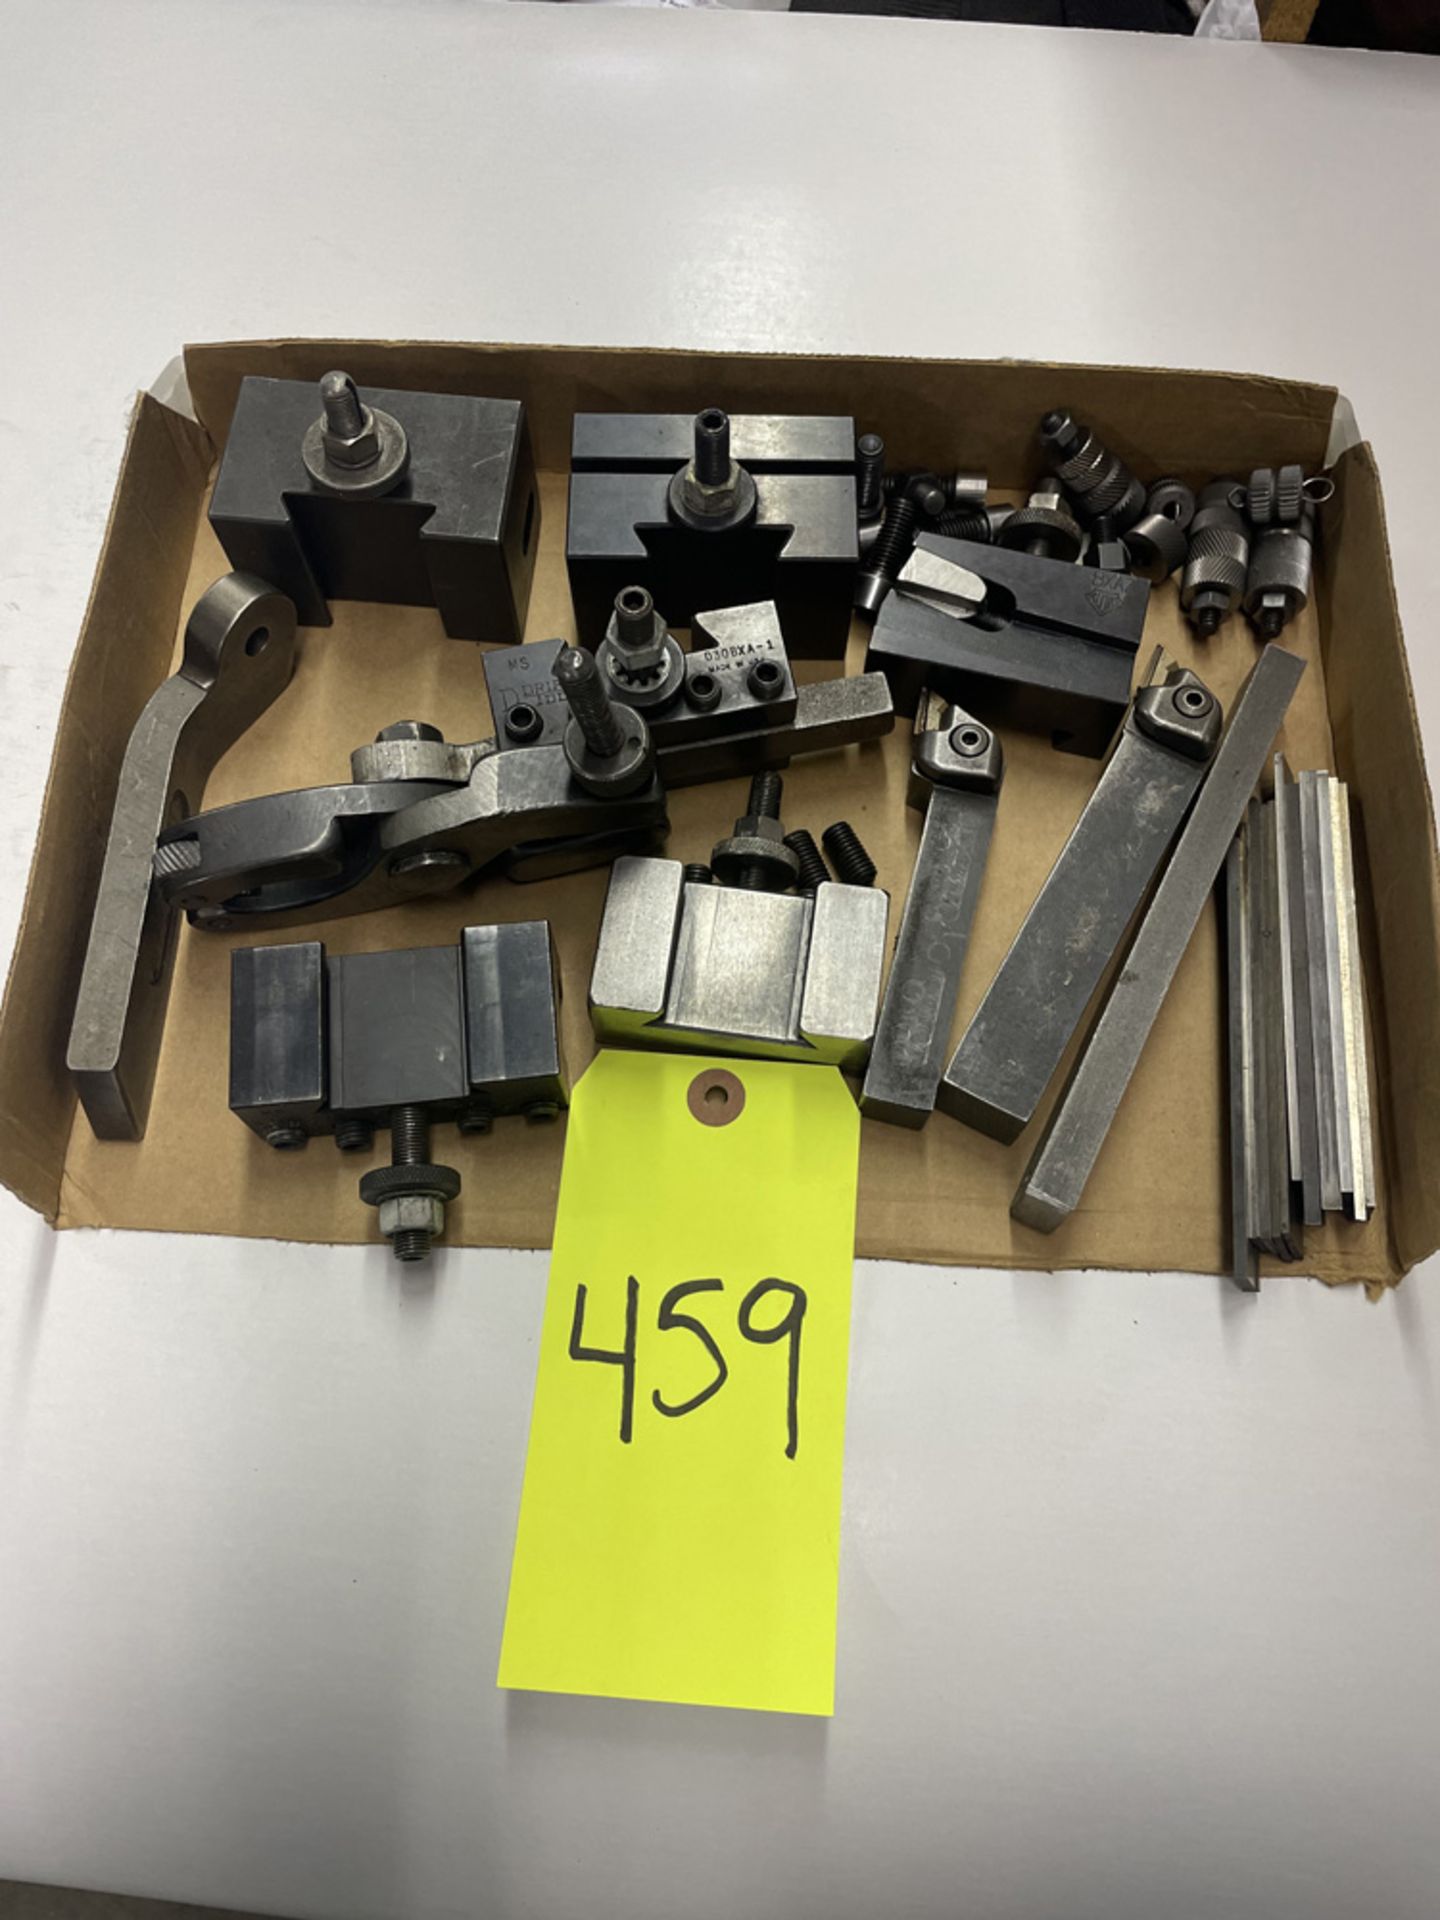 Lot with Dorian & Aloris Engine lathe toolholders, cutters & Misc. Lathe Tools